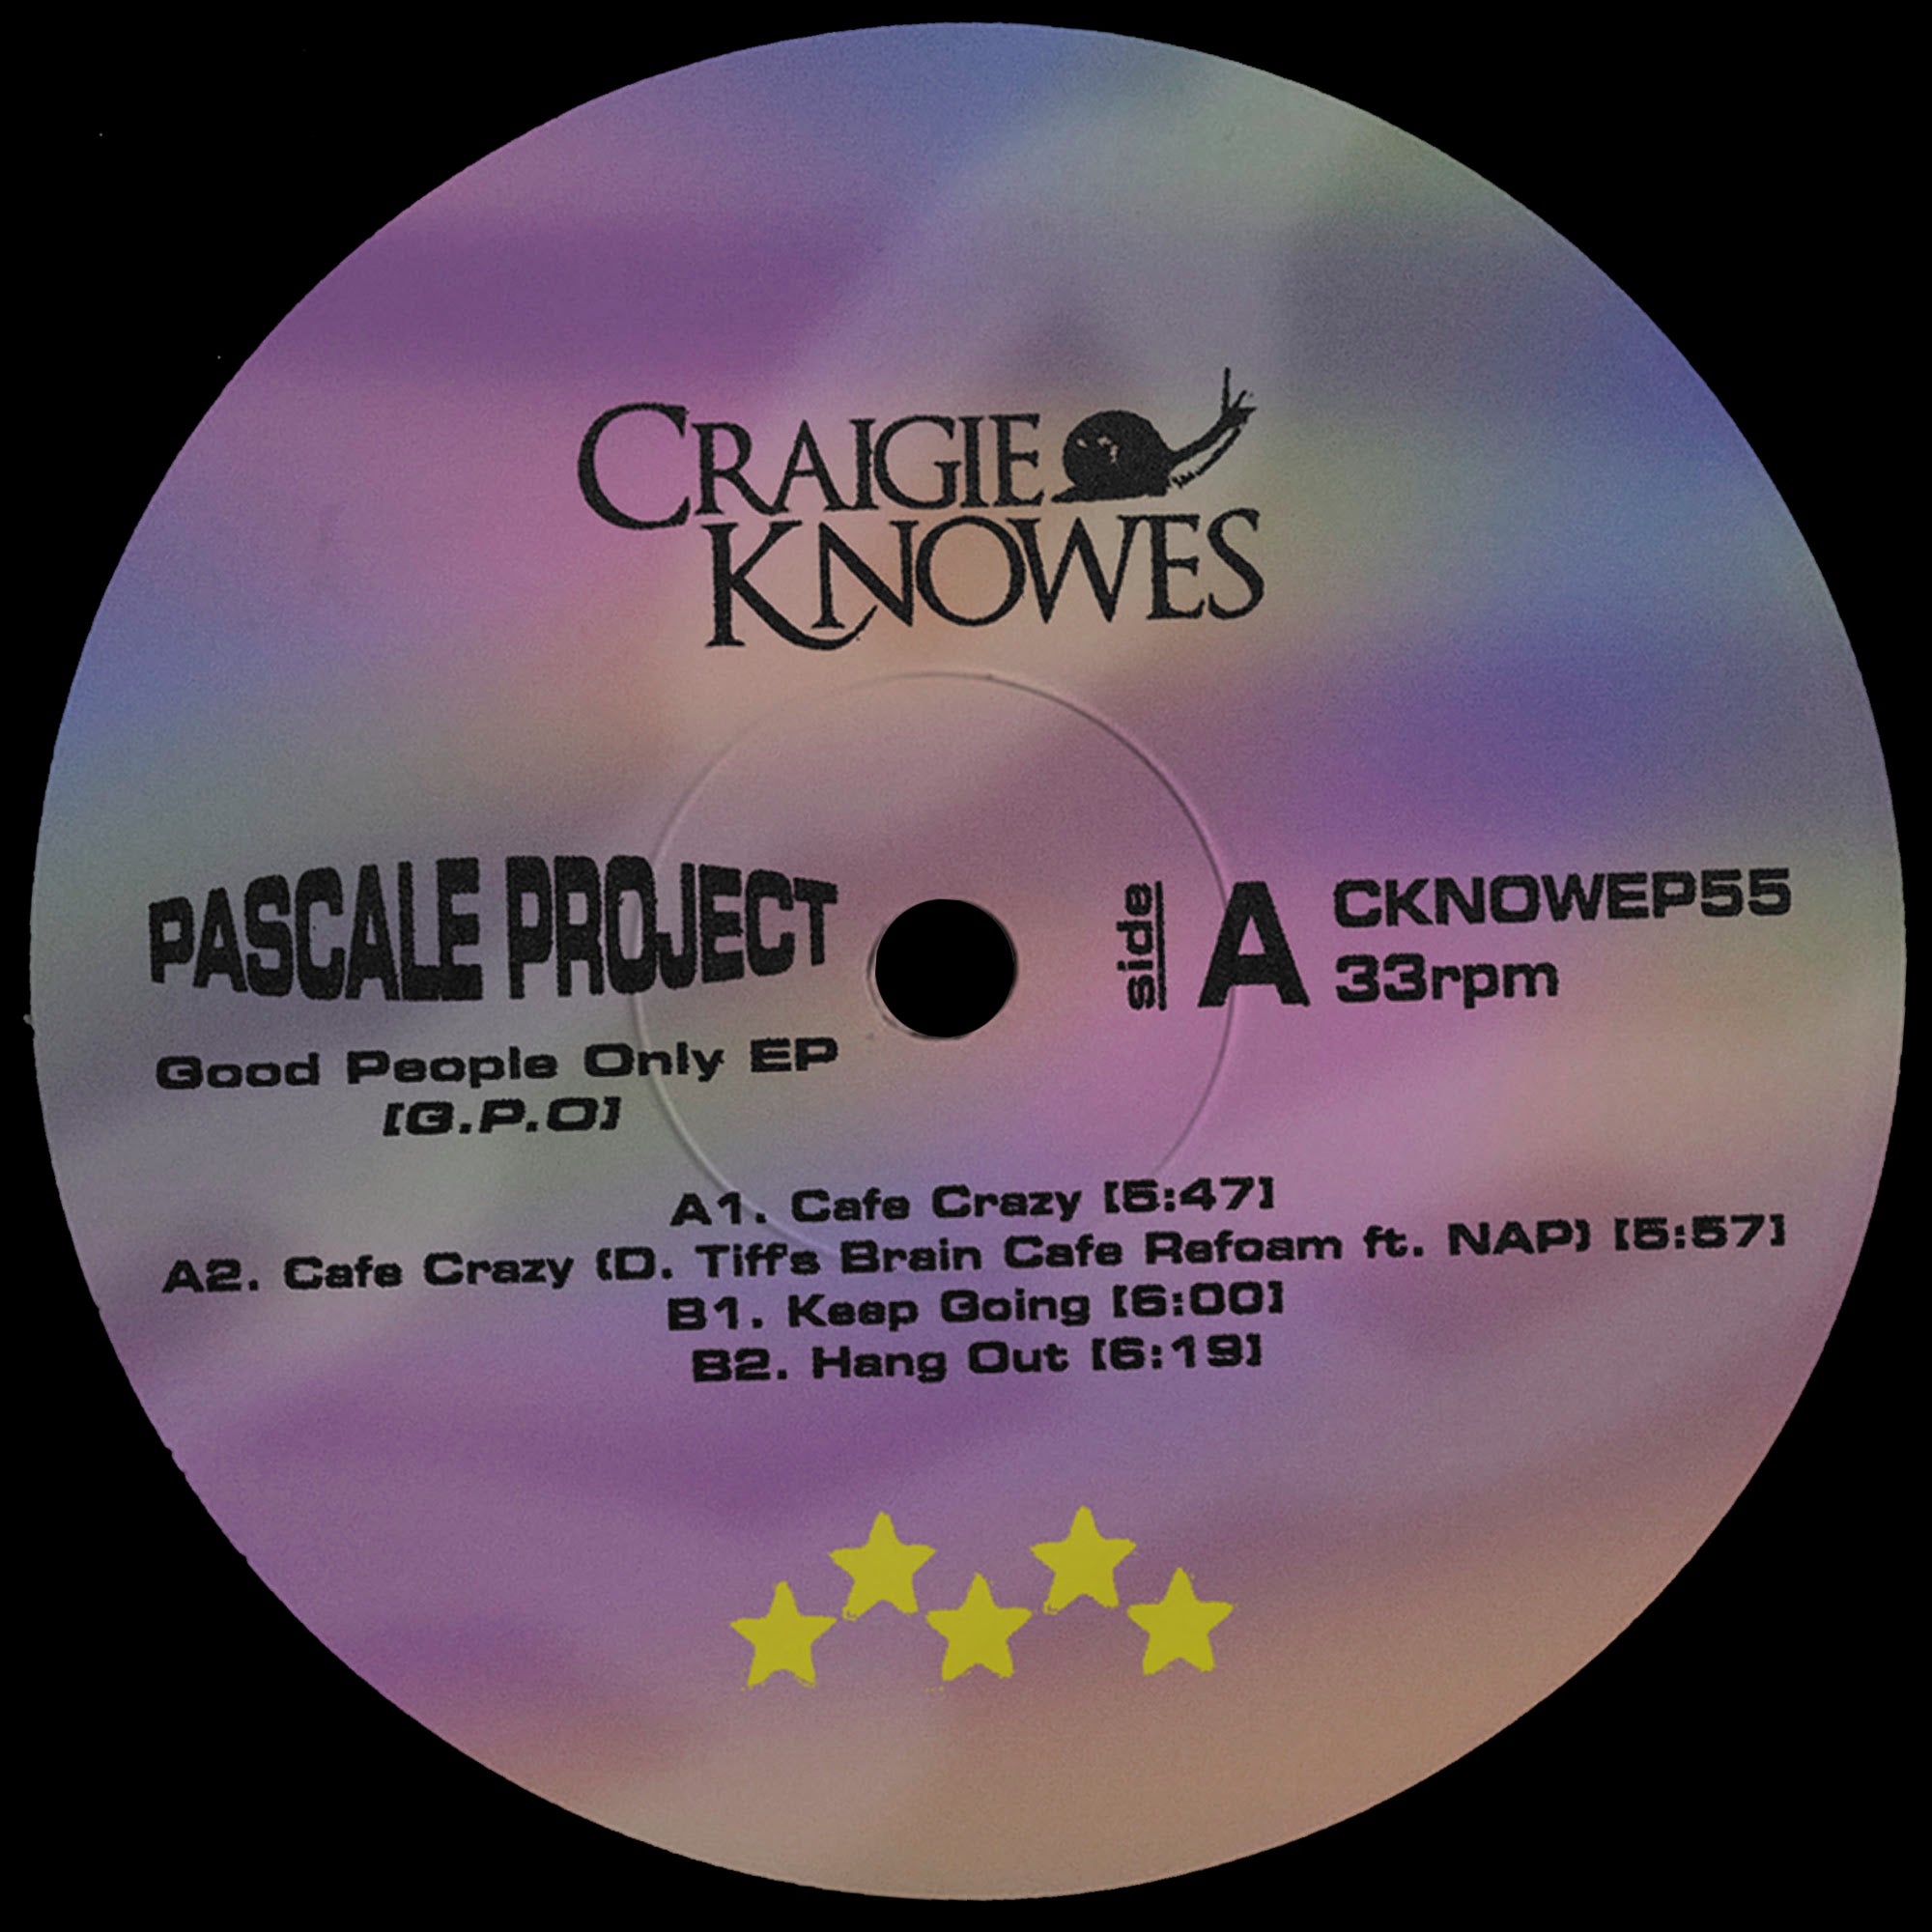 Pascale Project - Good People Only EP